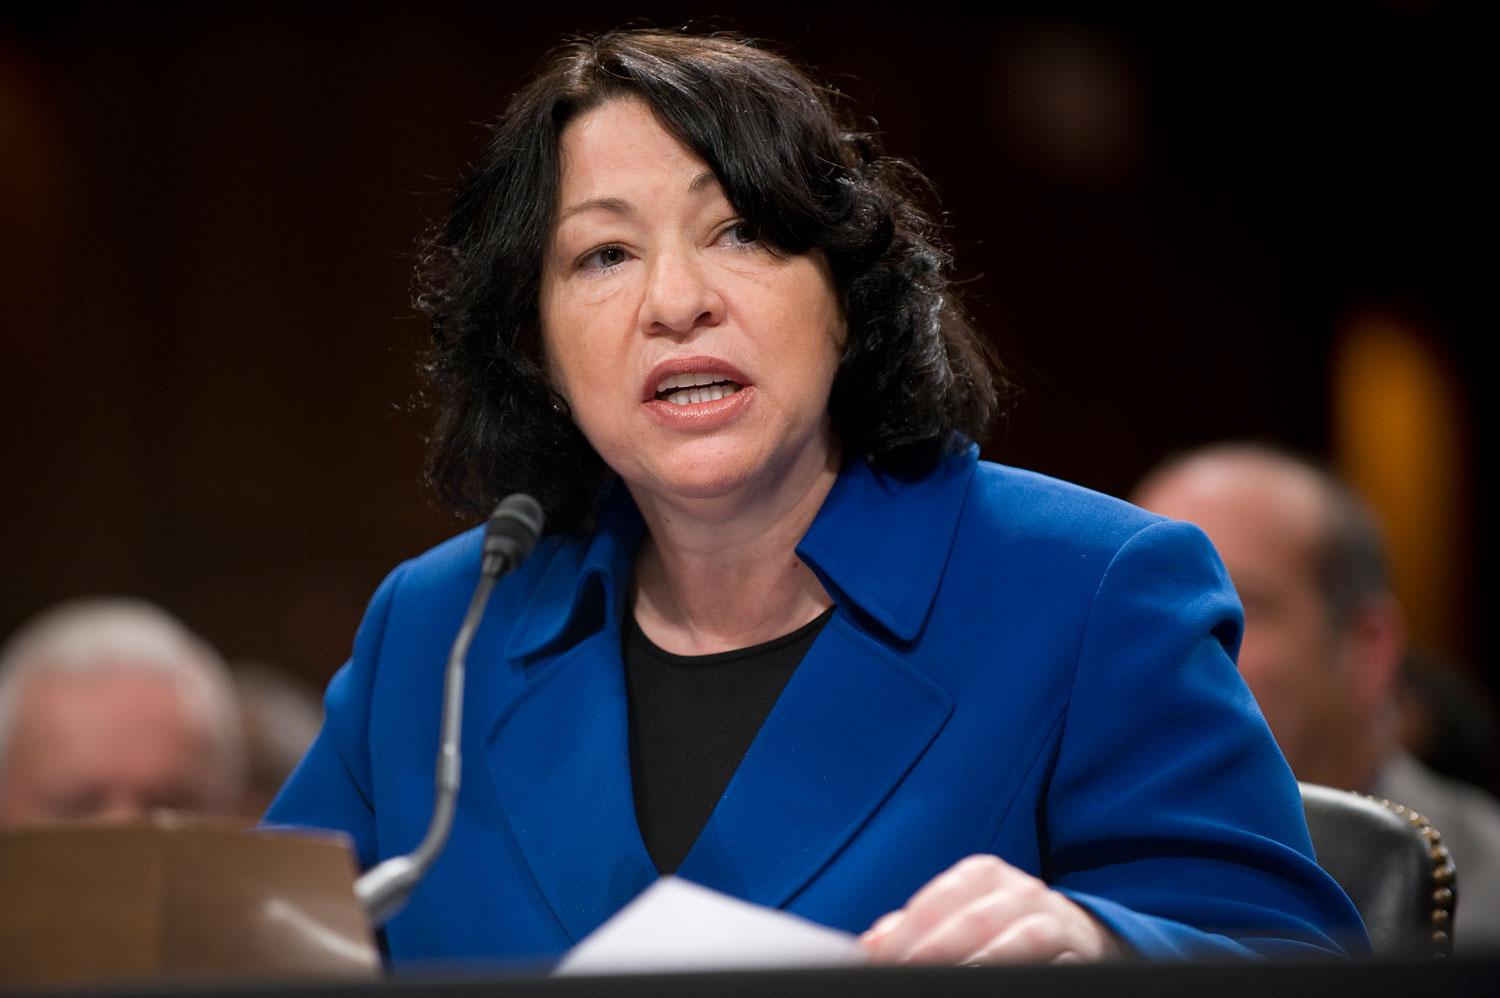 Supreme Court nominee Sonia Sotomayor makes on opening statement during her confirmation hearing before the Senate Judiciary Committee, July 13, 2009. (Tom Williams--CQ-Roll Call/Getty Images)